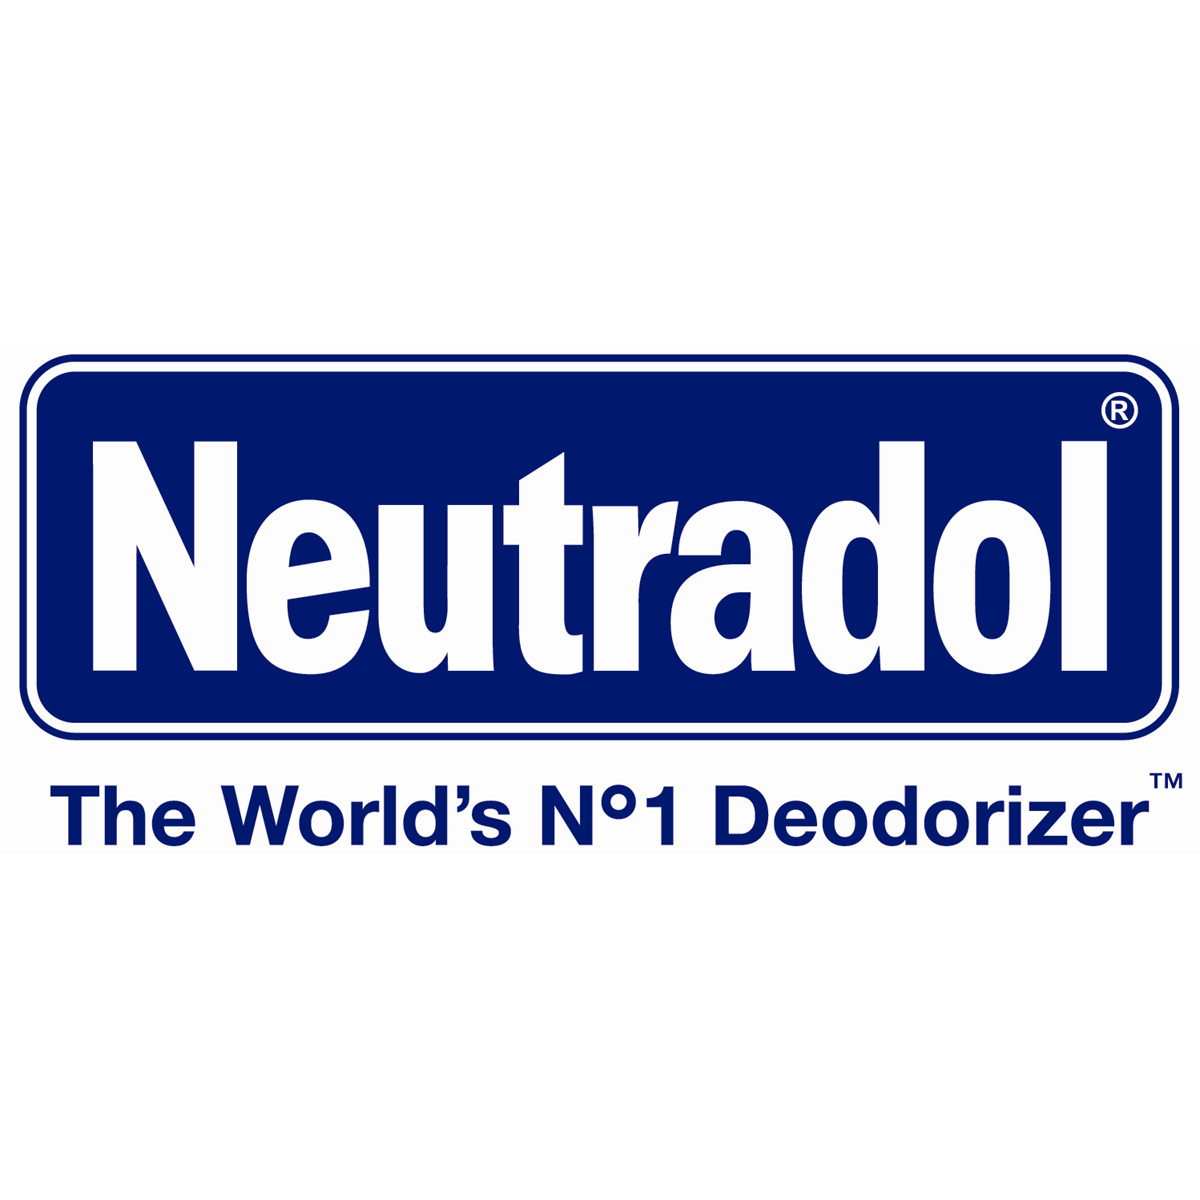 Where to Buy Neutradol Products